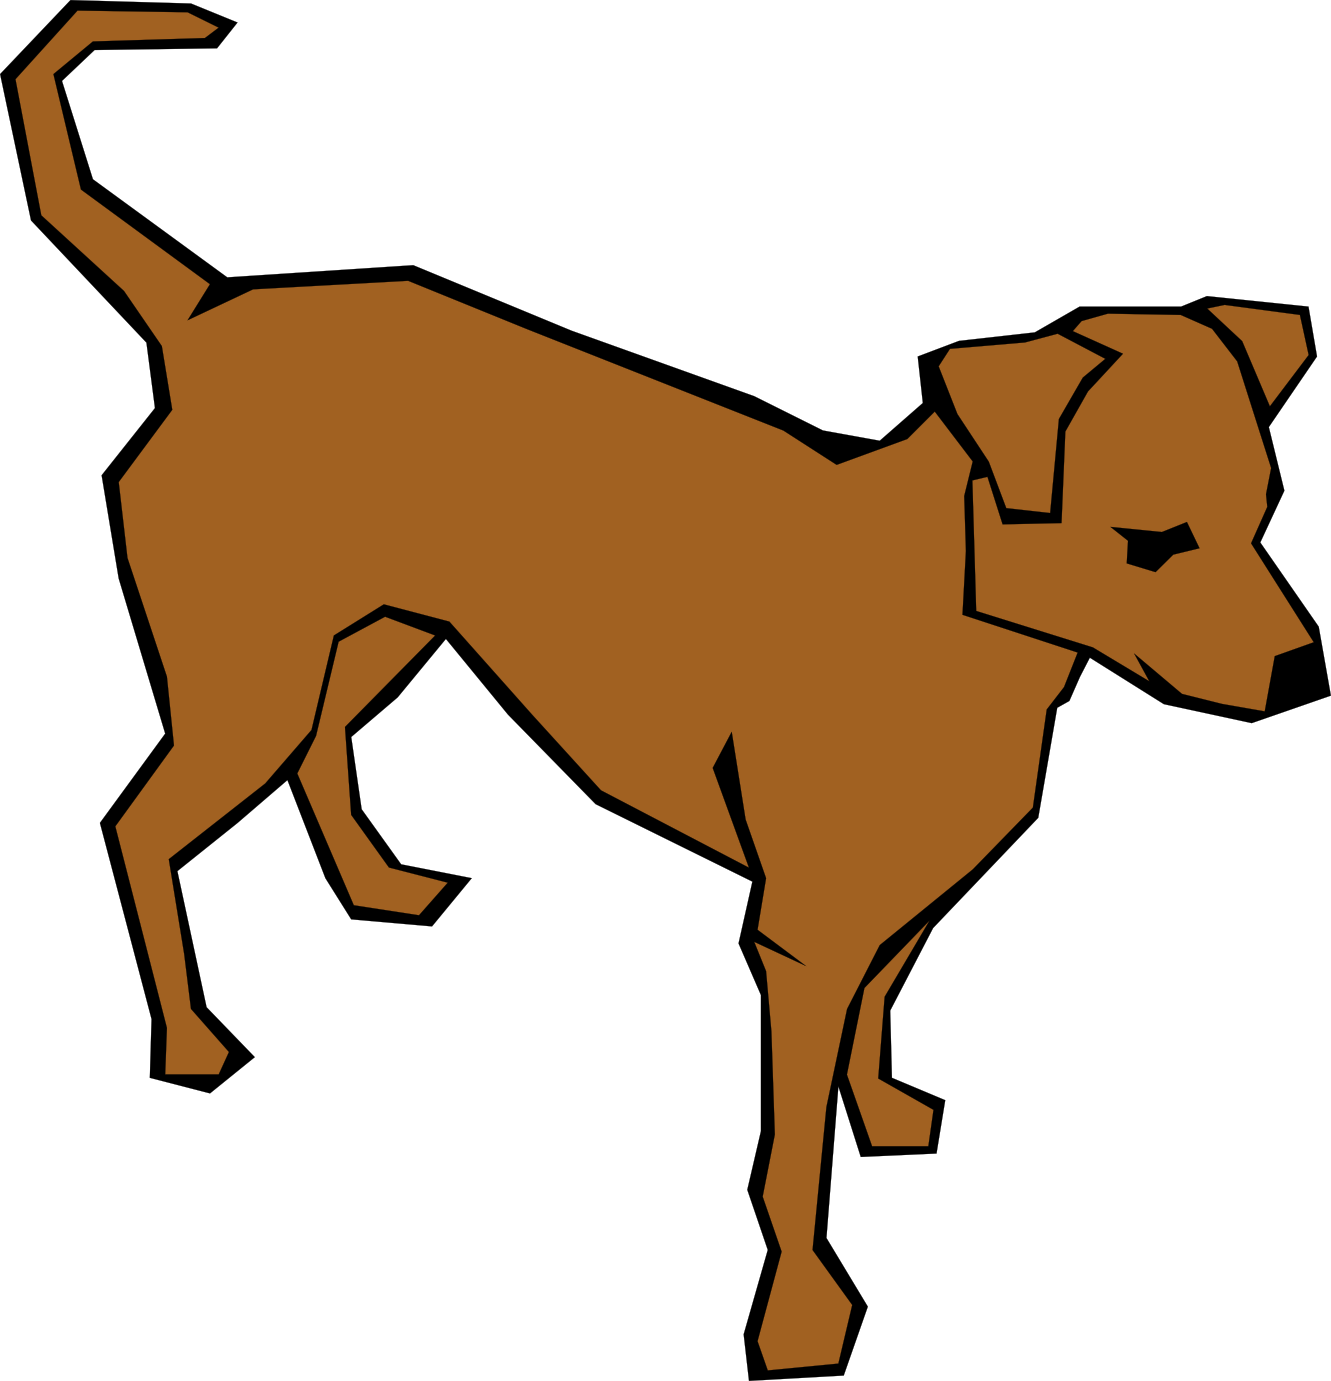 Simple Drawing Of Dog - ClipArt Best